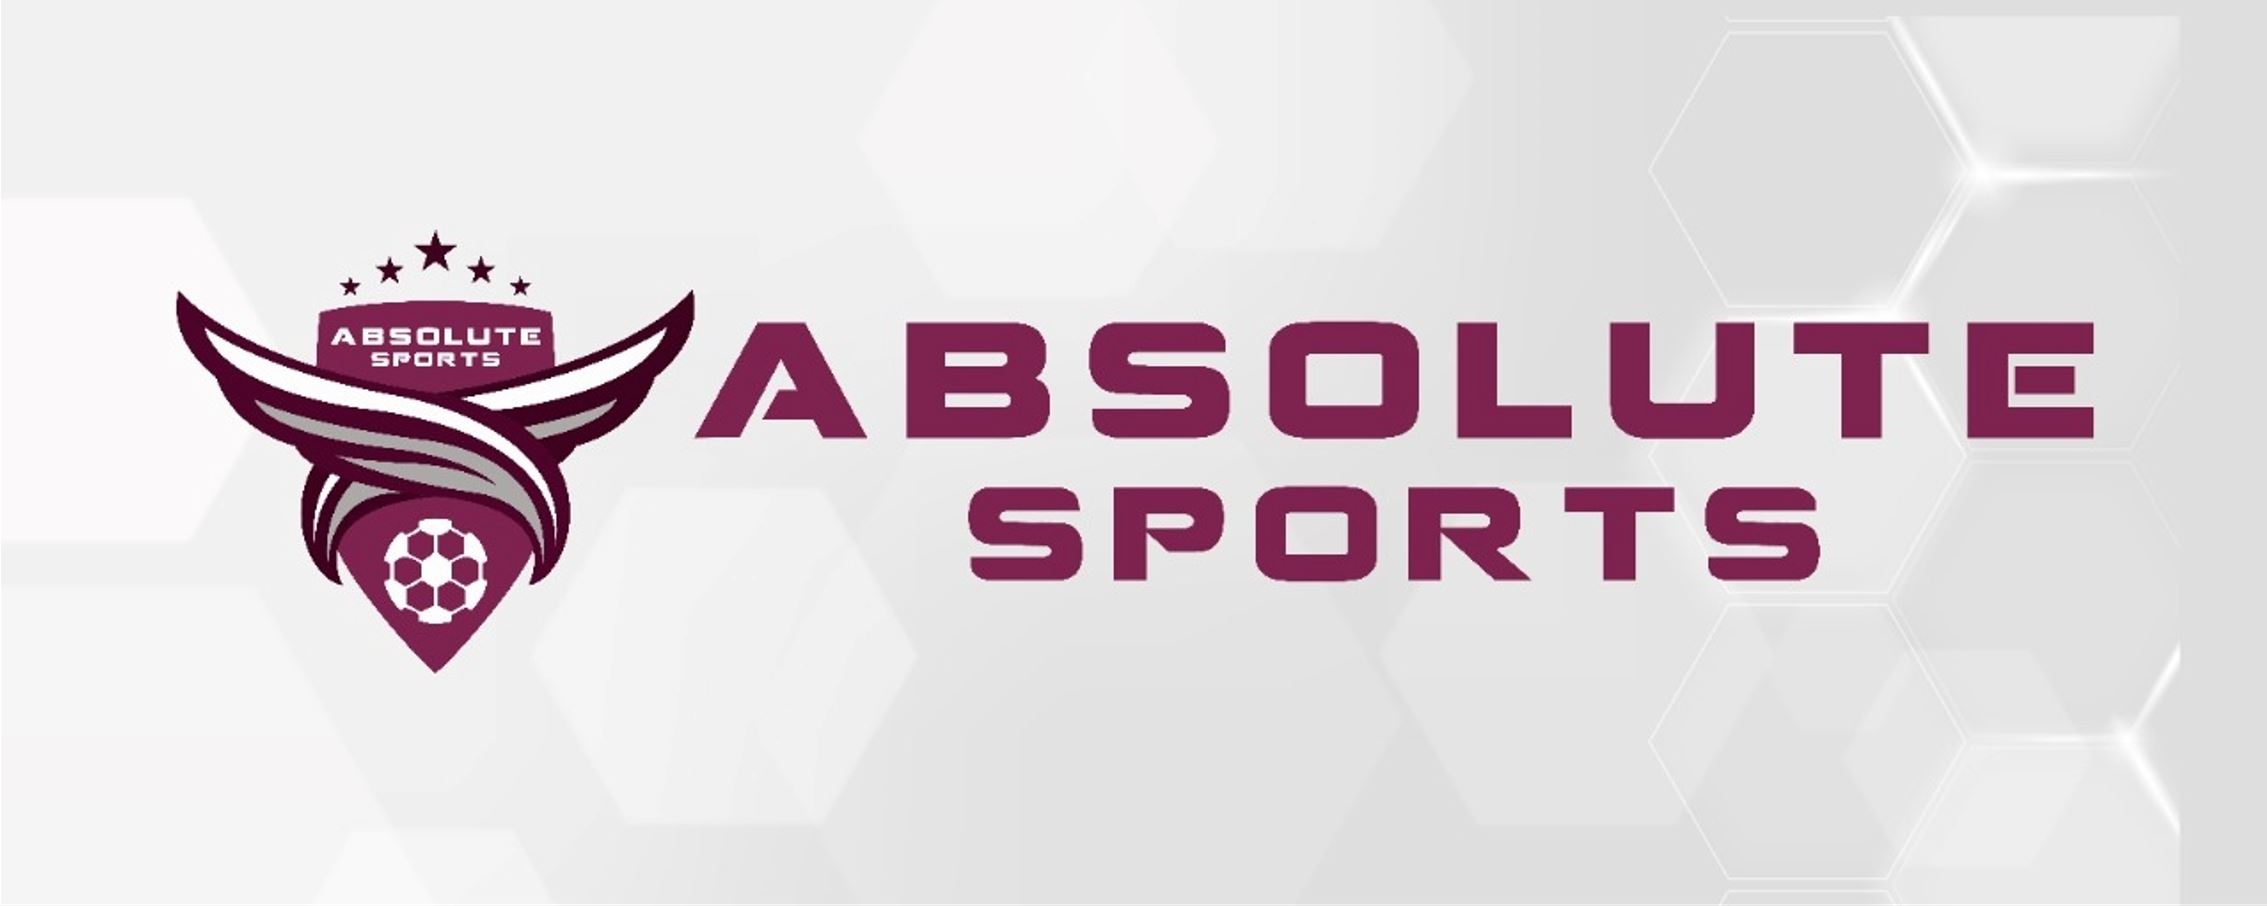 Absolute Sports: A sports academy established and existing in Qatar, having Badminton and Football trainings with a professional trainers.